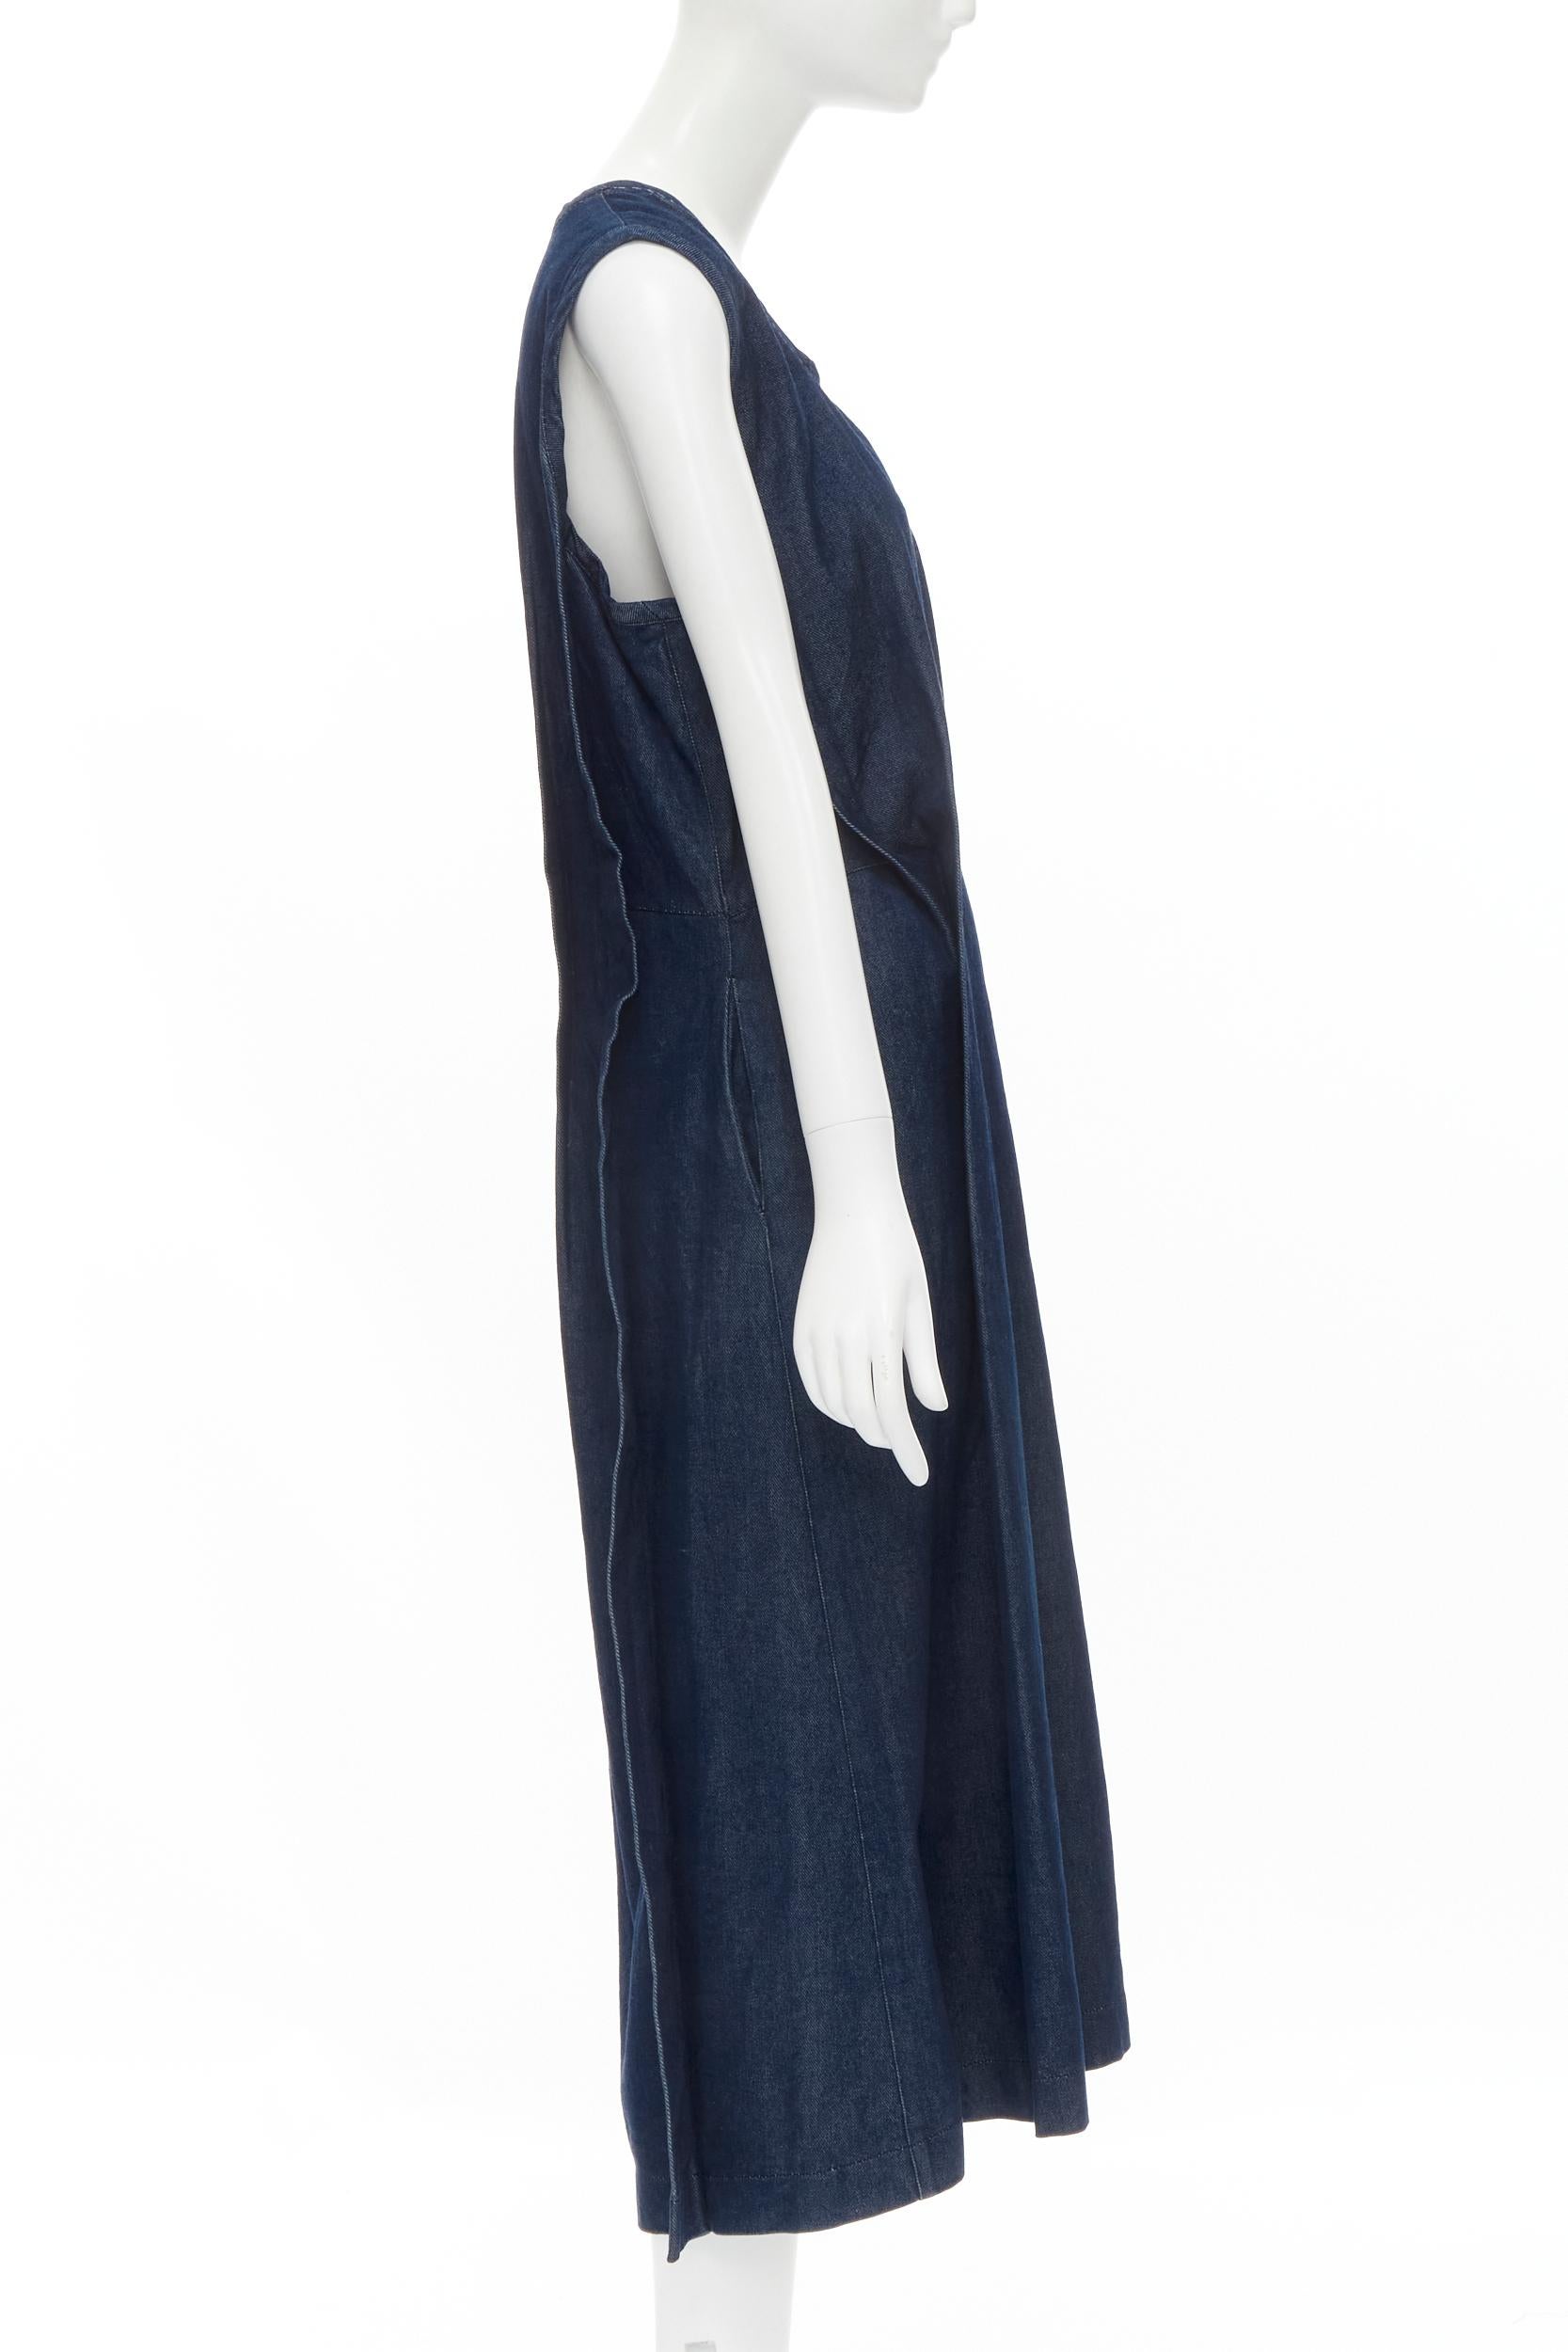 COMME DES GARCONS Vintage 1991 indigo blue denim pinched seam dress M In Excellent Condition For Sale In Hong Kong, NT